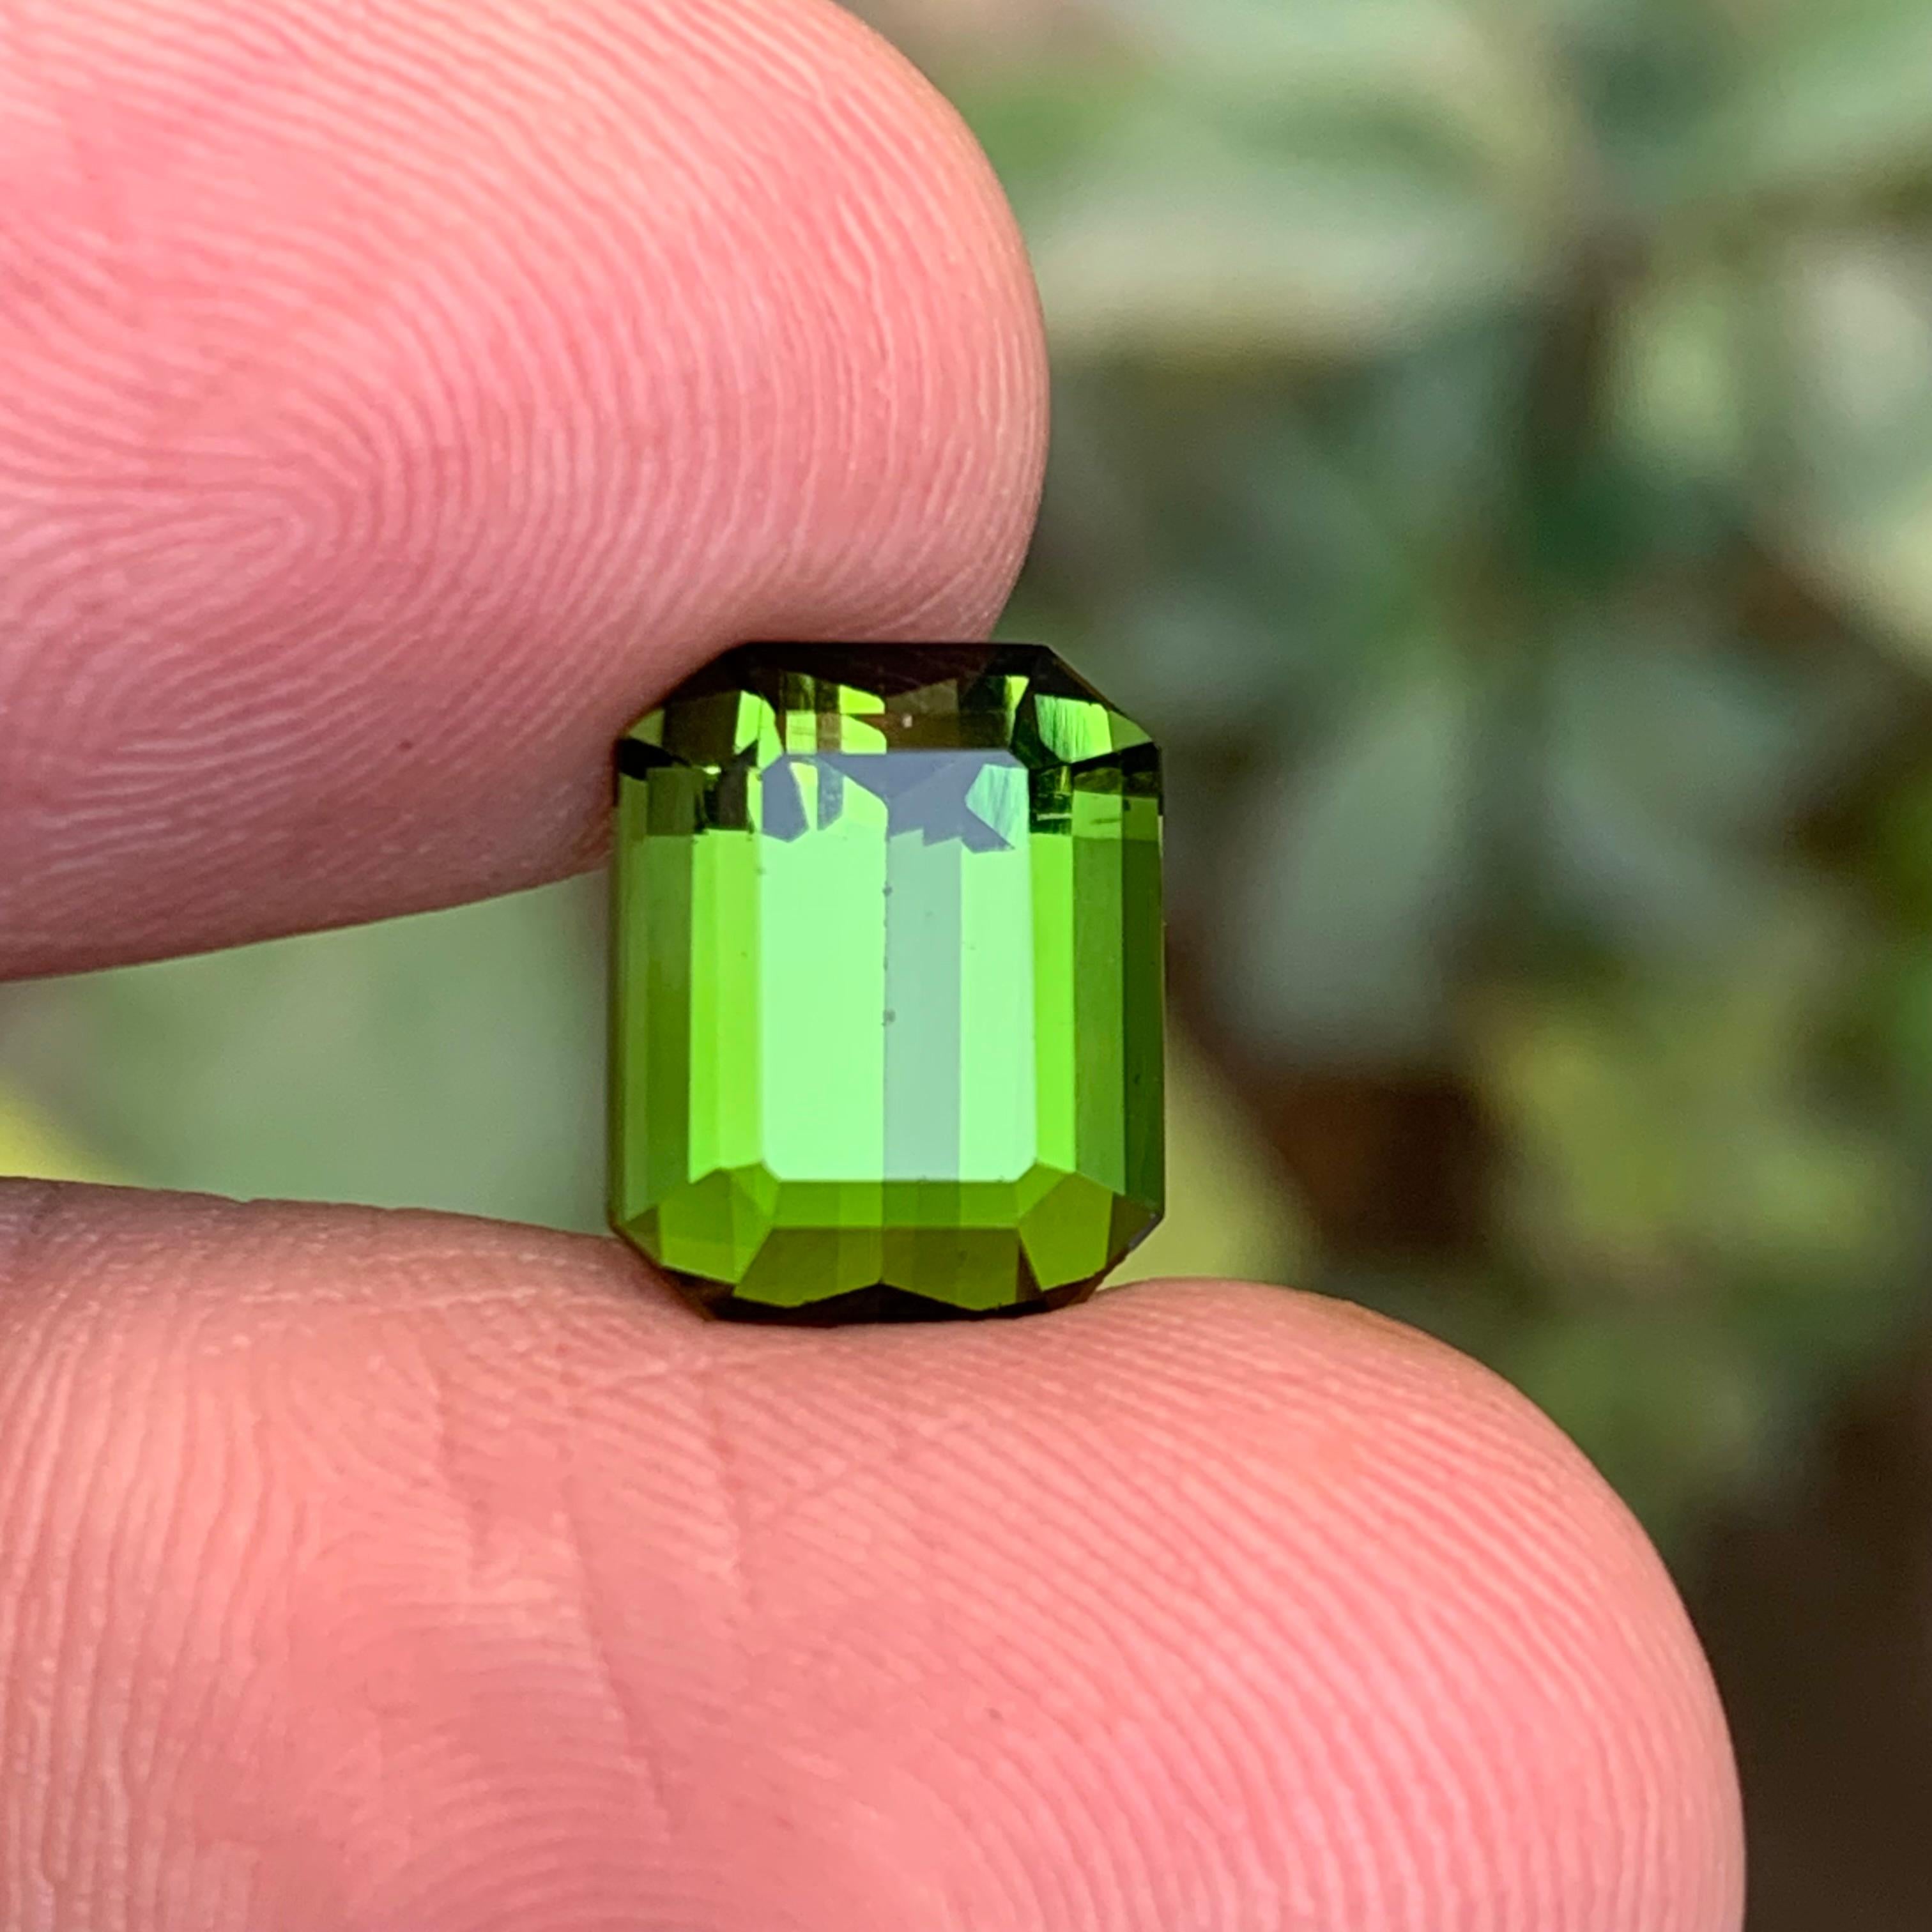 Magnificent yellowish green Natural Tourmaline Loose Gemstone, that has been finely cut and polished in emerald cut design. A perfect adornment for a precious lady or gentleman.

Gemstone Type: Tourmaline 
Weight: 5.35 Carats
Dimensions: 11.37 x